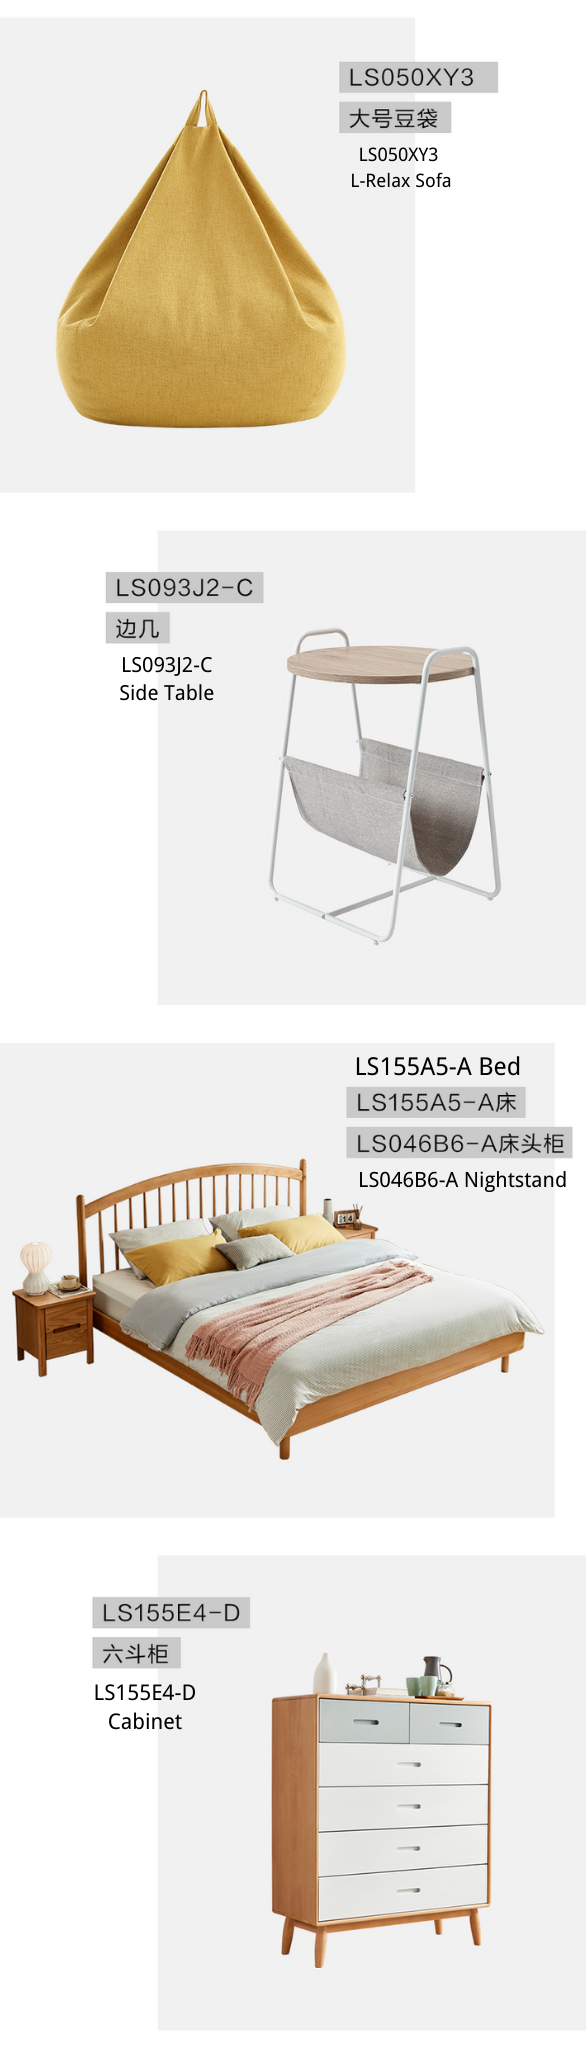 LS050XY3 Relax Sofa.png